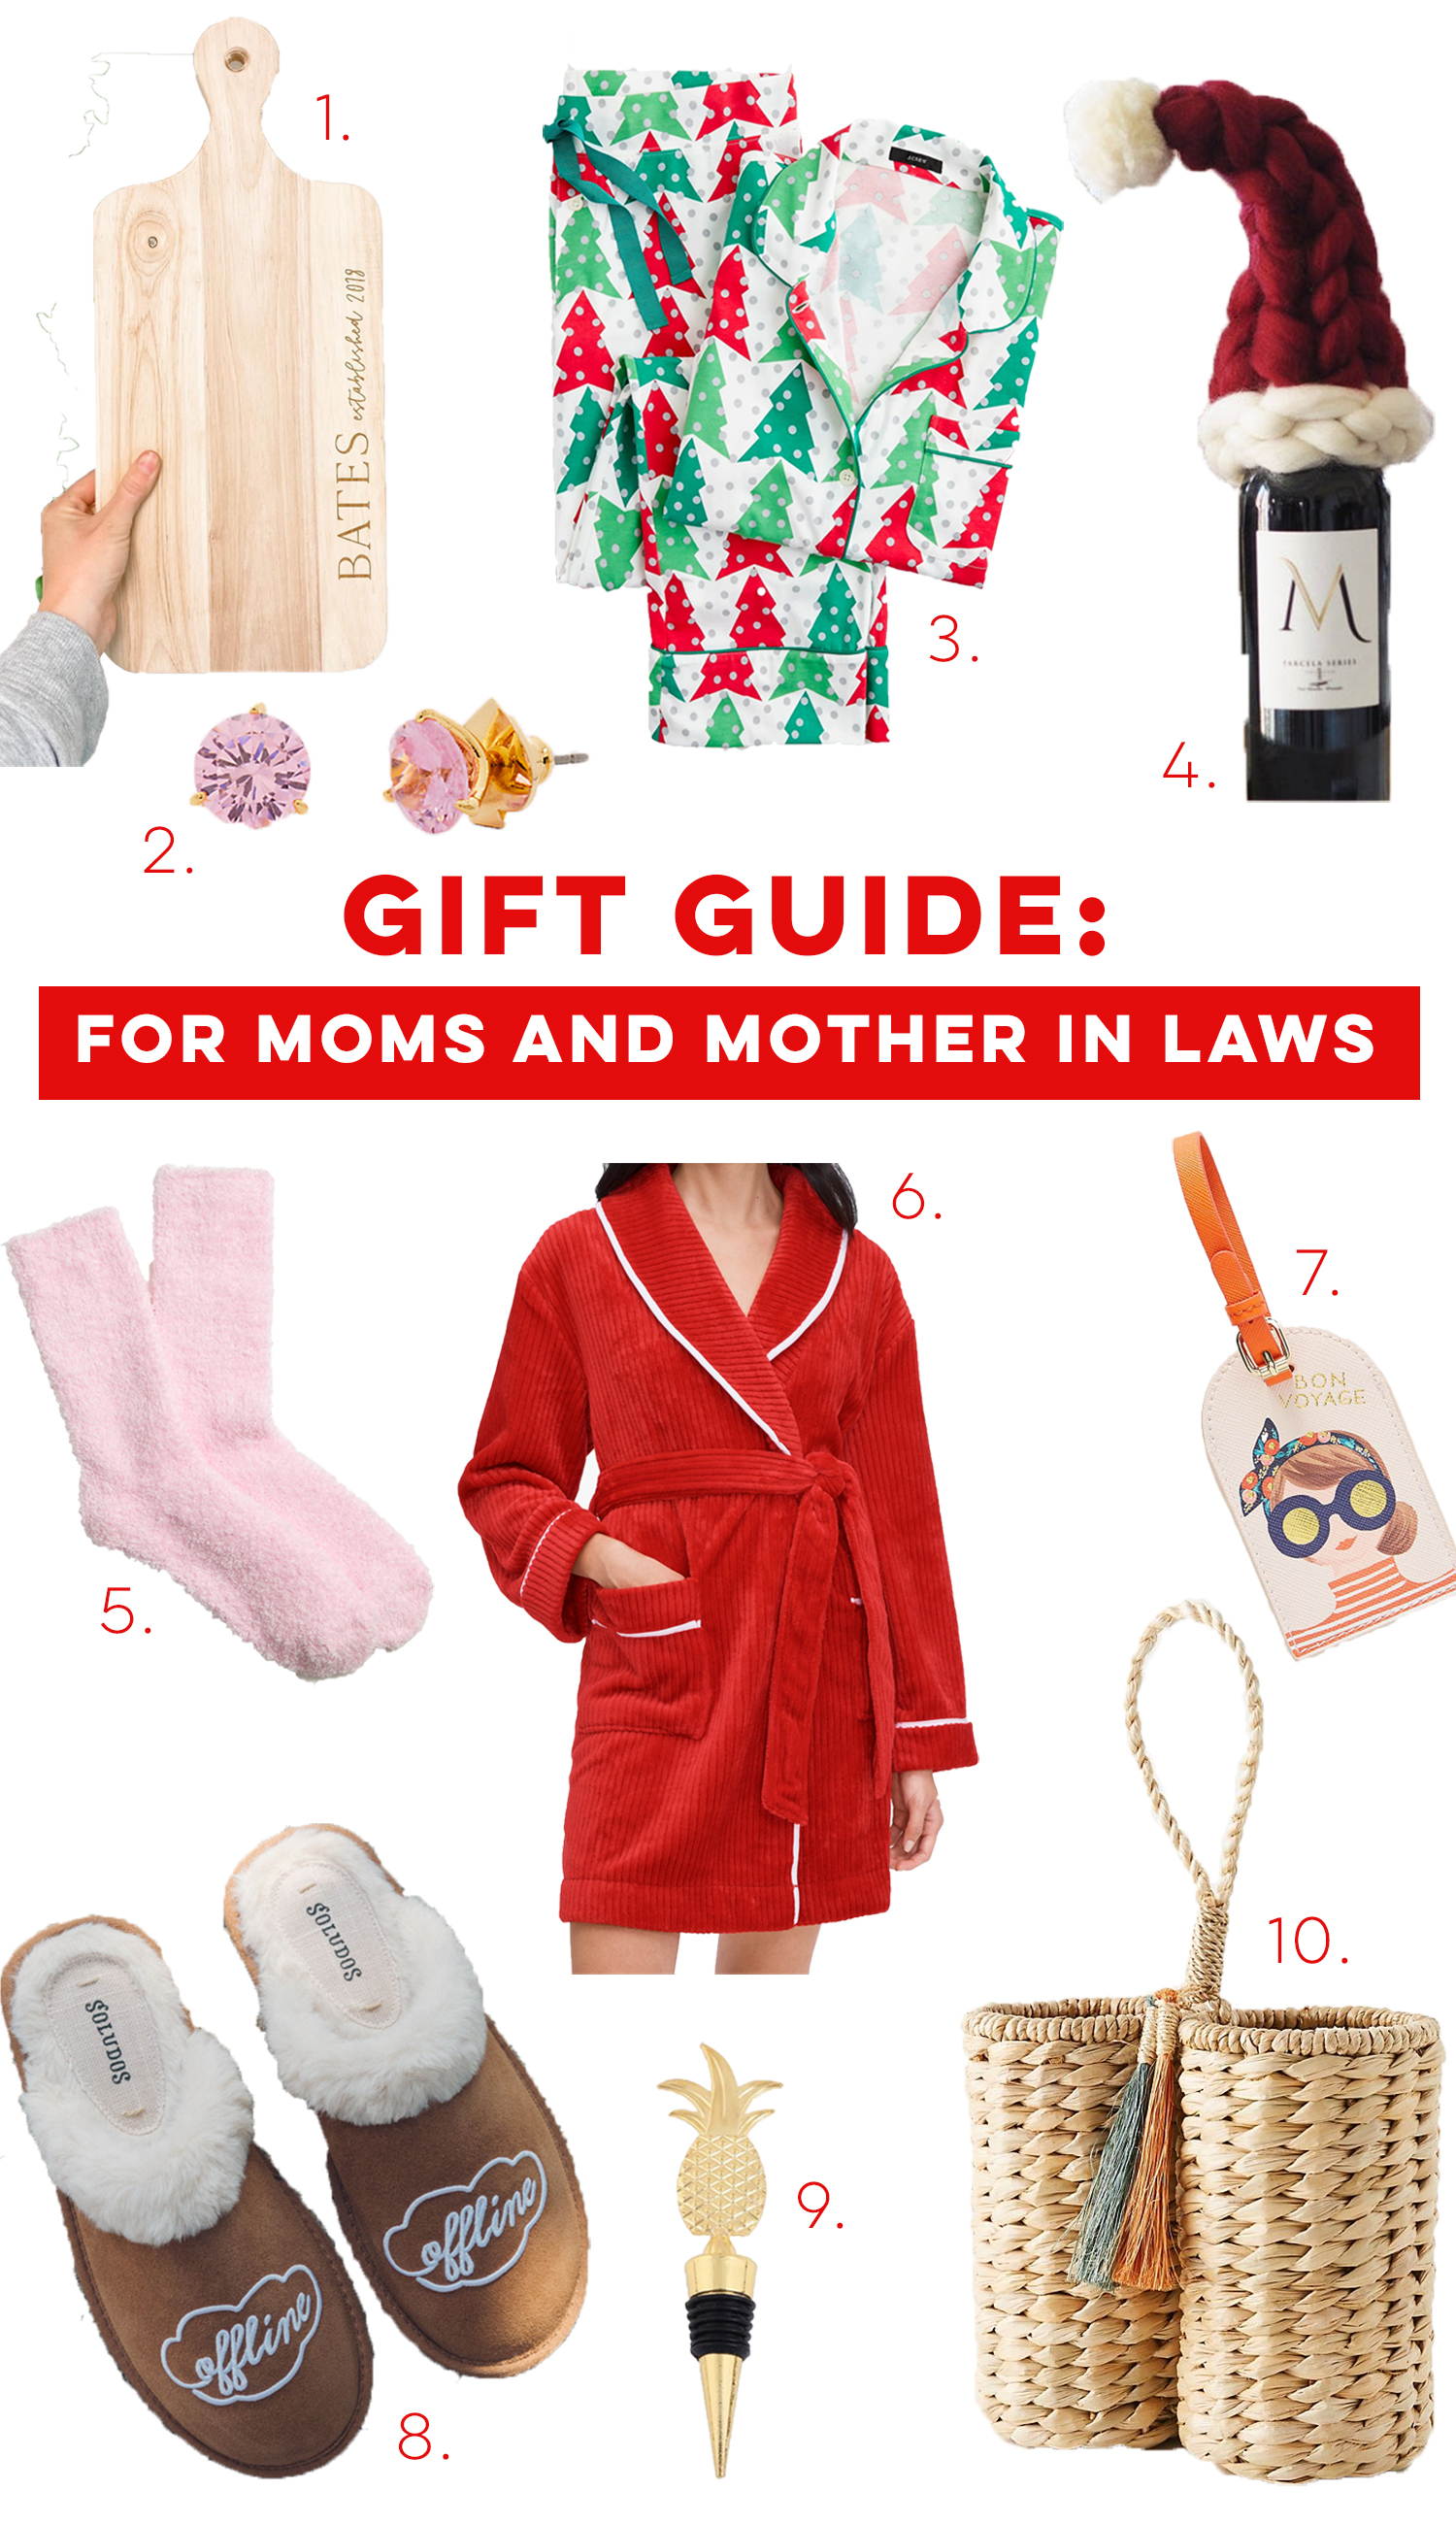 Gift Guide for Moms and Mother in Laws / Mother in Law Gifts / Gifts for Moms / Holiday Gift Guide for Her / Matching Pajama Set - Sunshine Style , A Florida Based Fashion and Lifestyle Blog